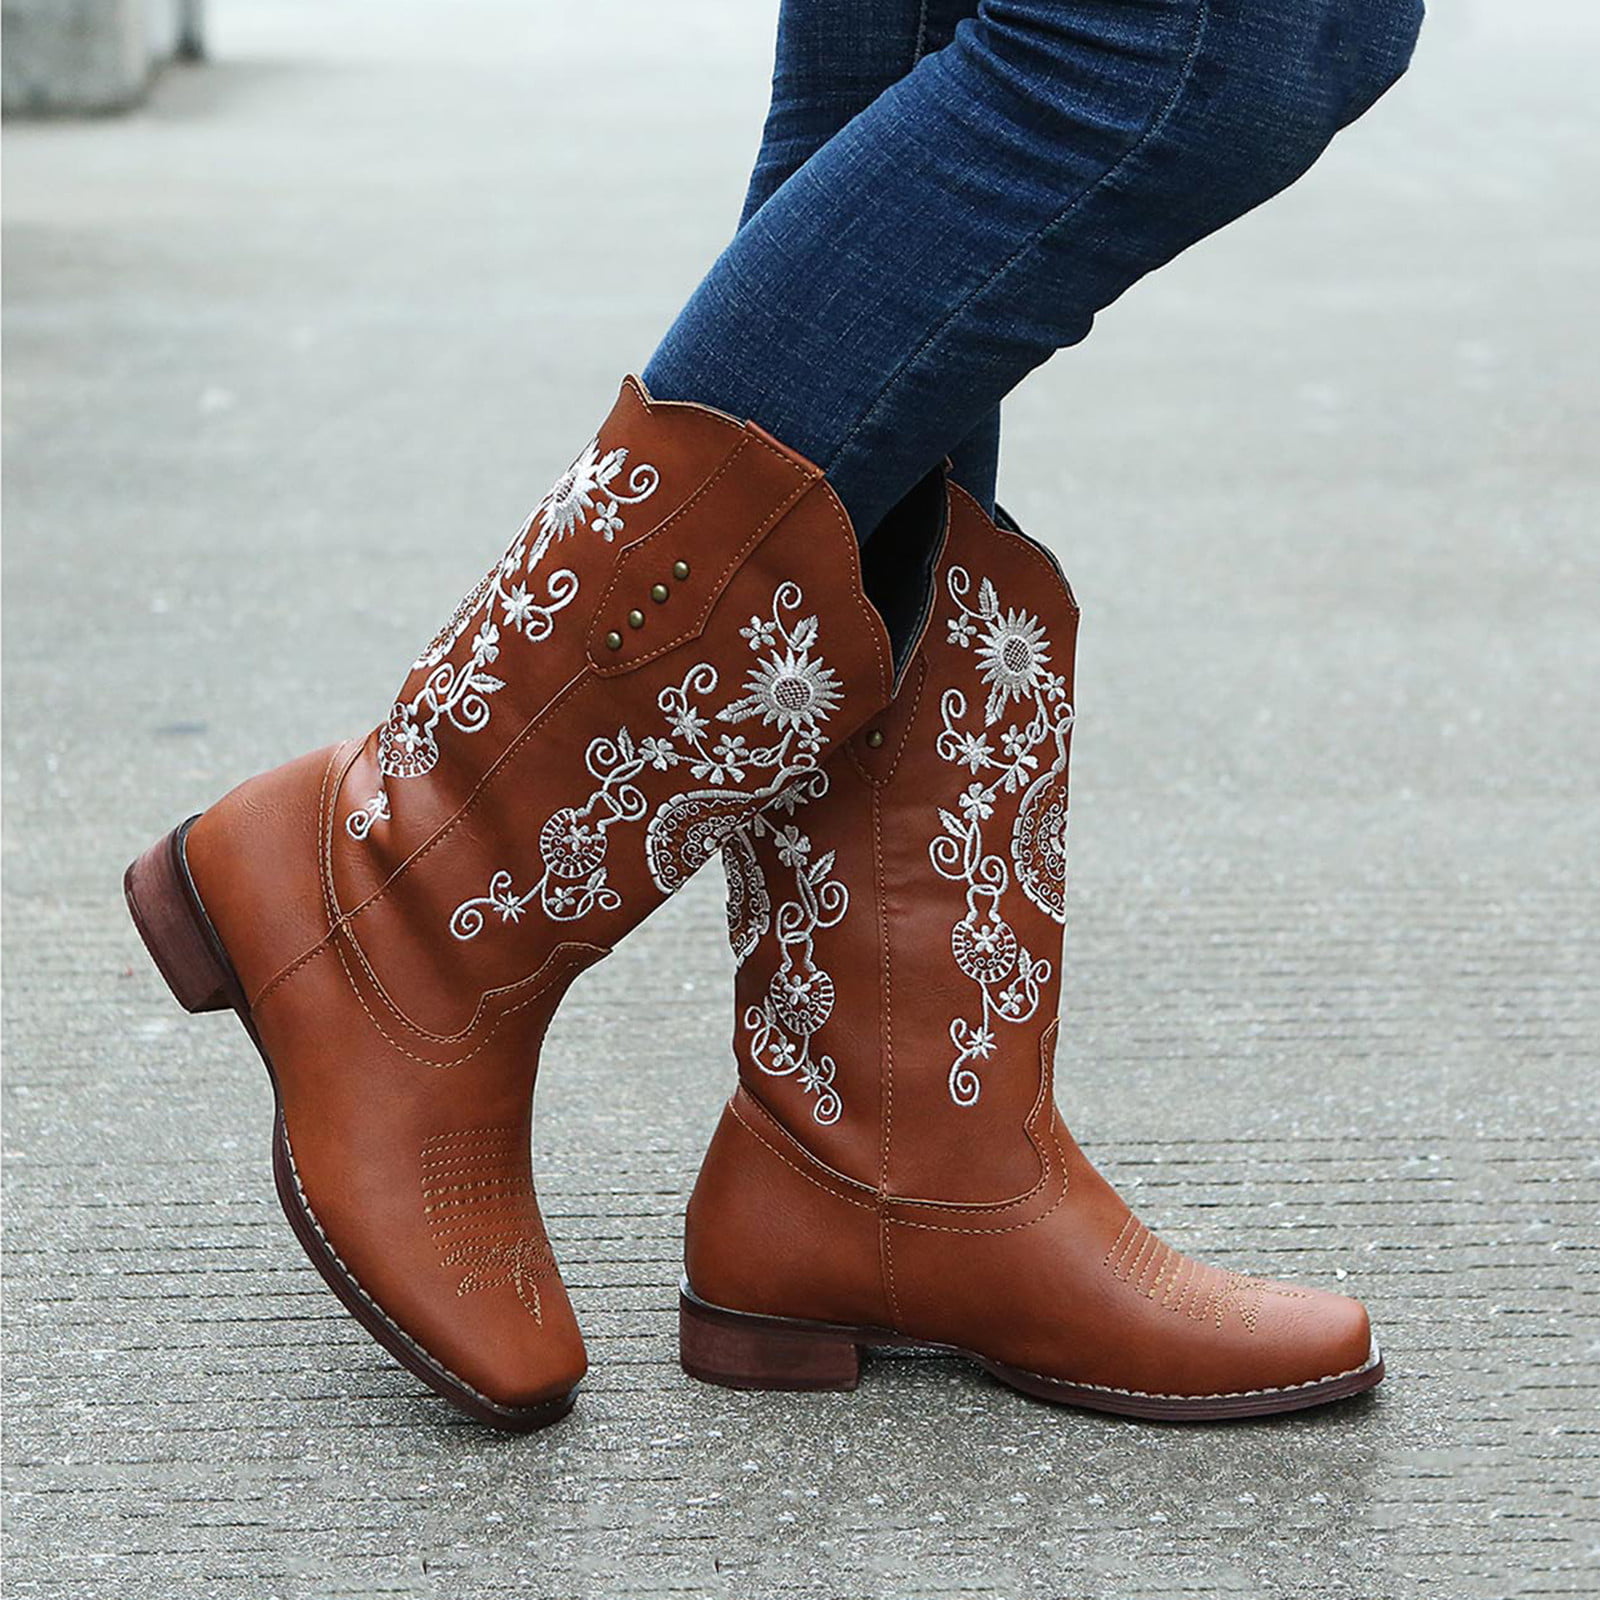 Women Western Mid Calf Boots Embroidery Sunflowers Low Block Heel Cowboy Shoes 